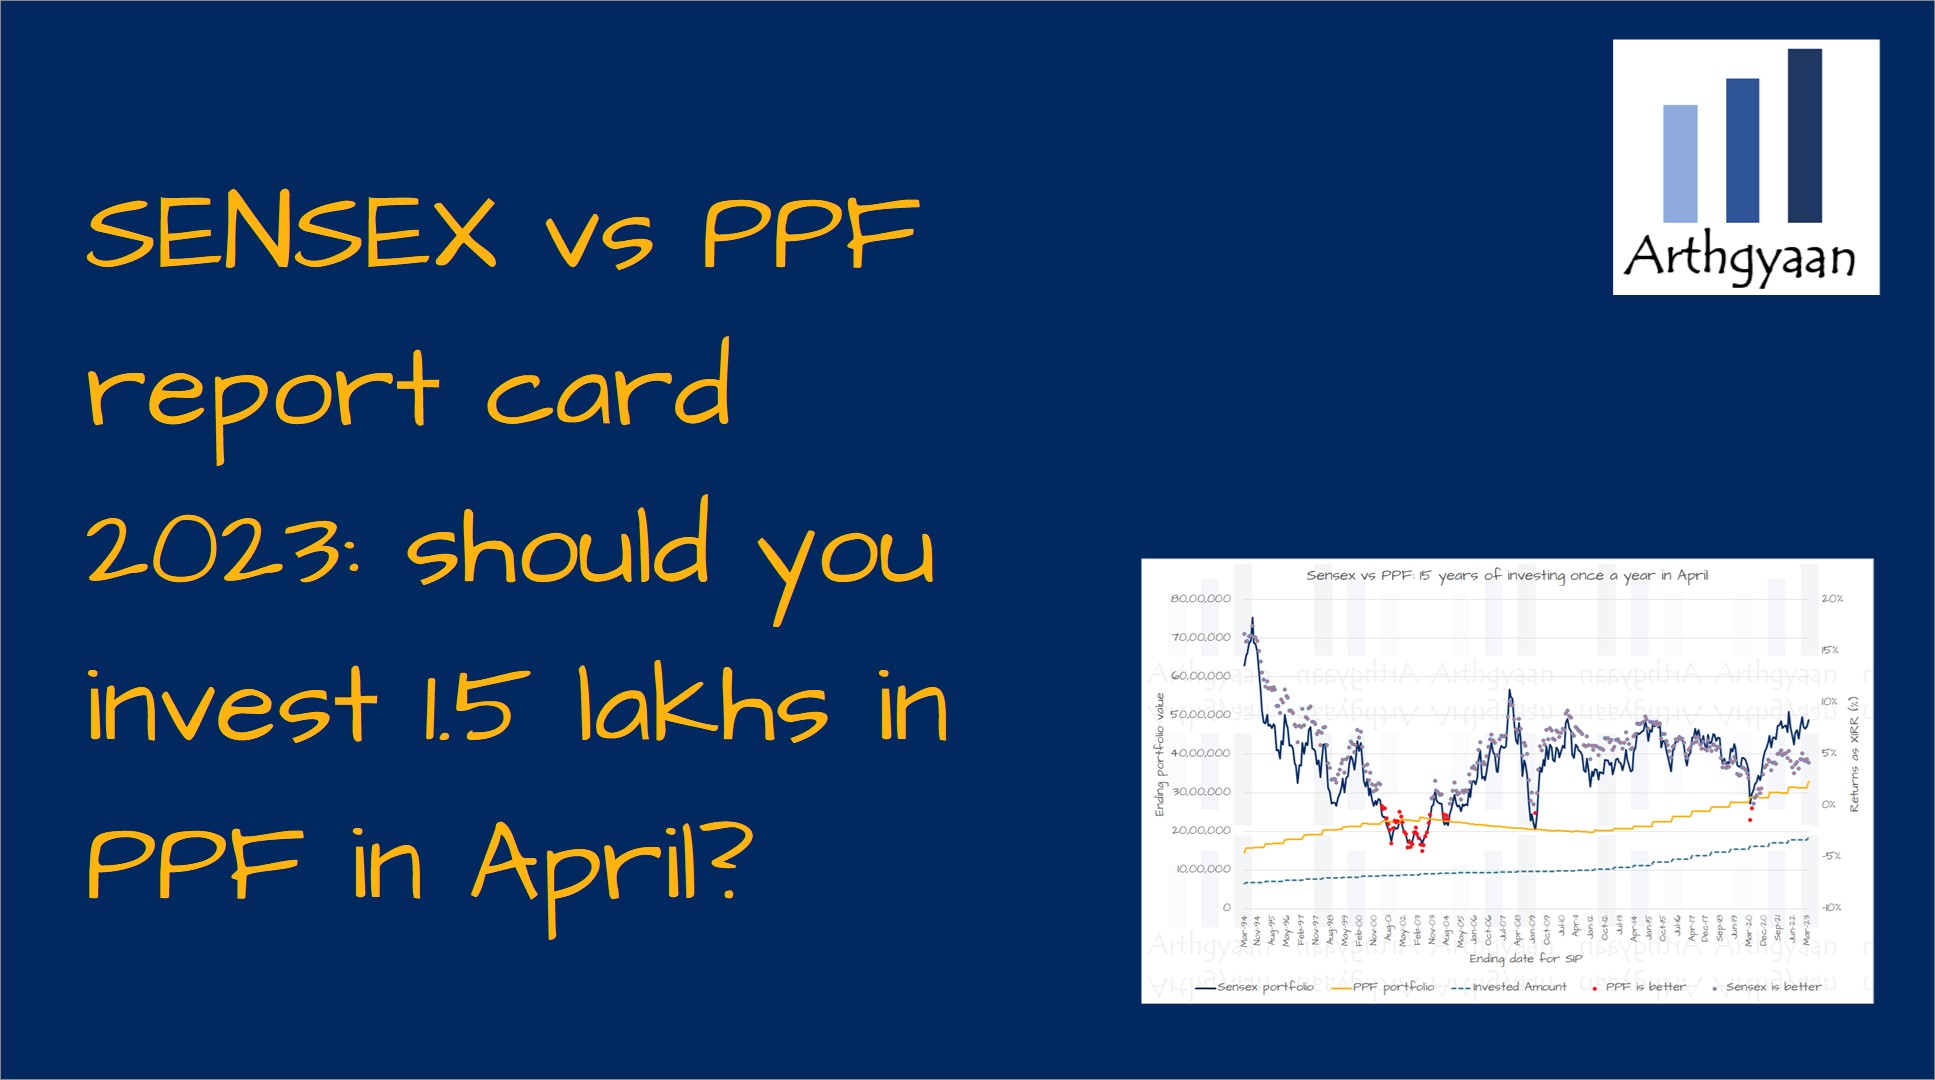 <p>This article compares how the PPF has performed against the SENSEX since 1979 to help investors decide if they should invest a lump sum in PPF in April 2023.</p>

